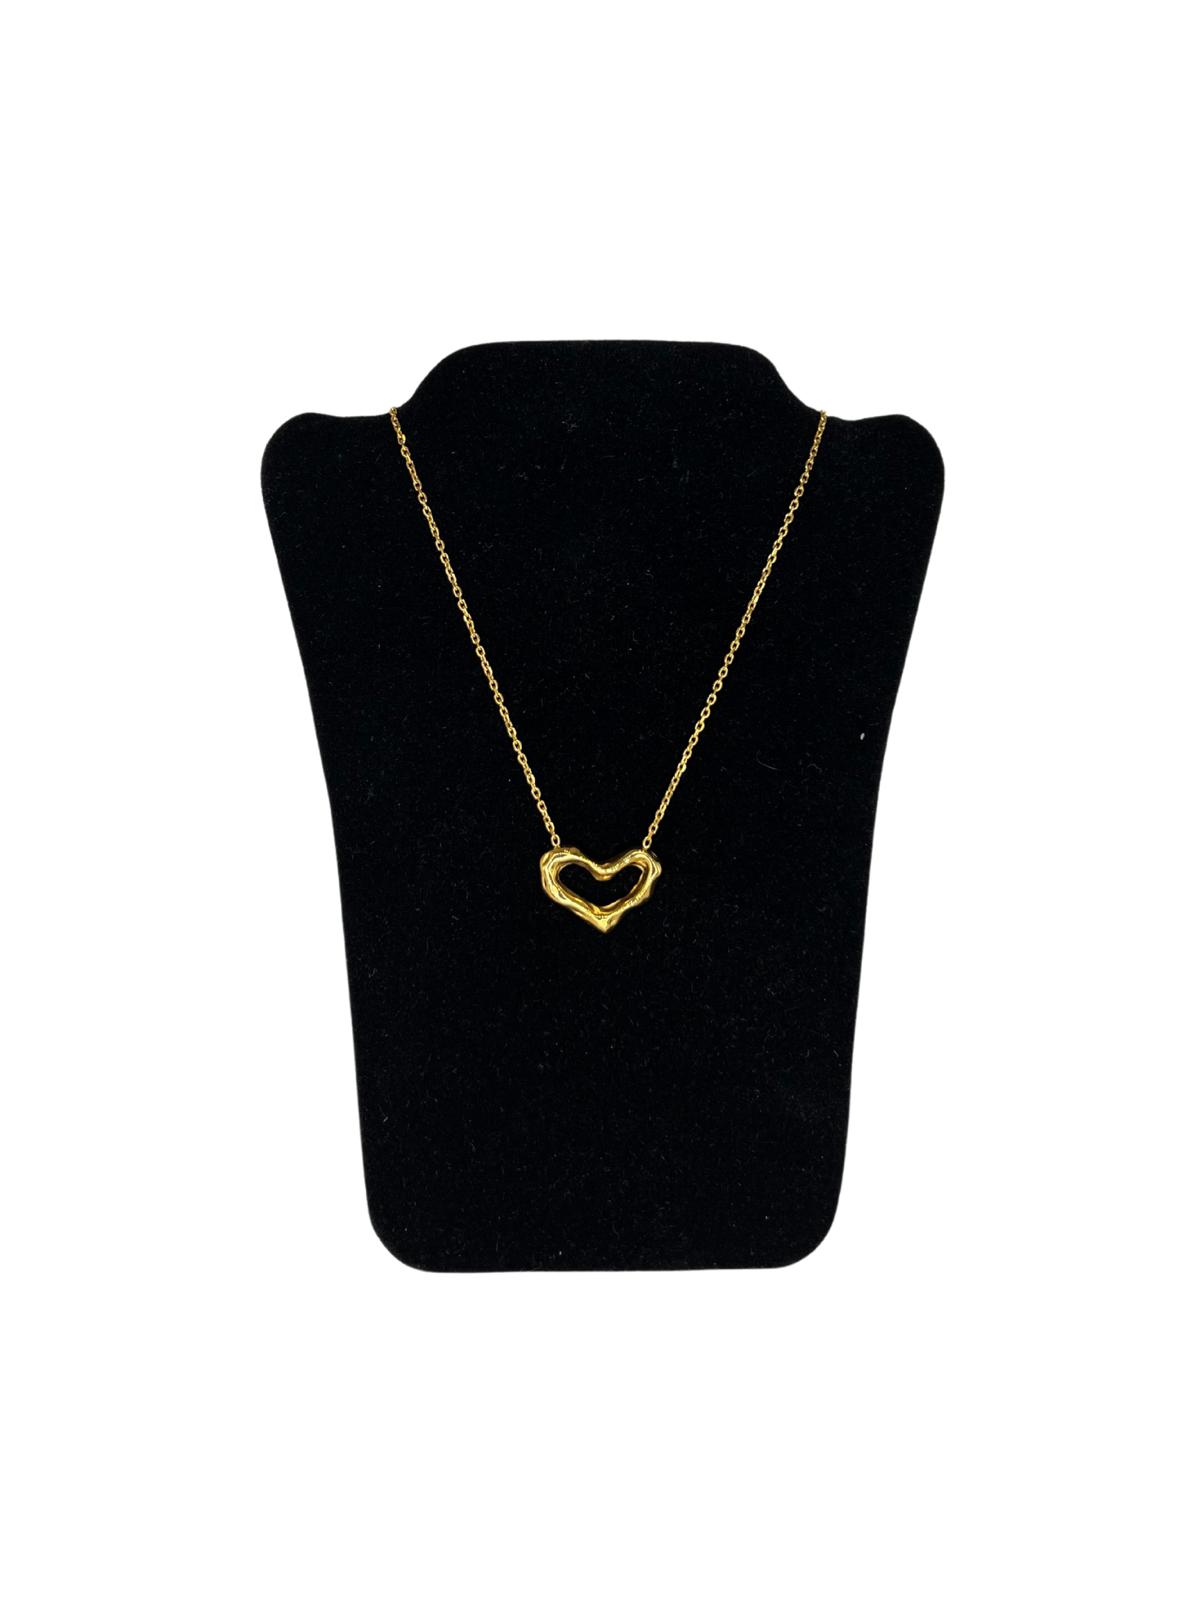 24K Gold plated Heart Pendant Necklace